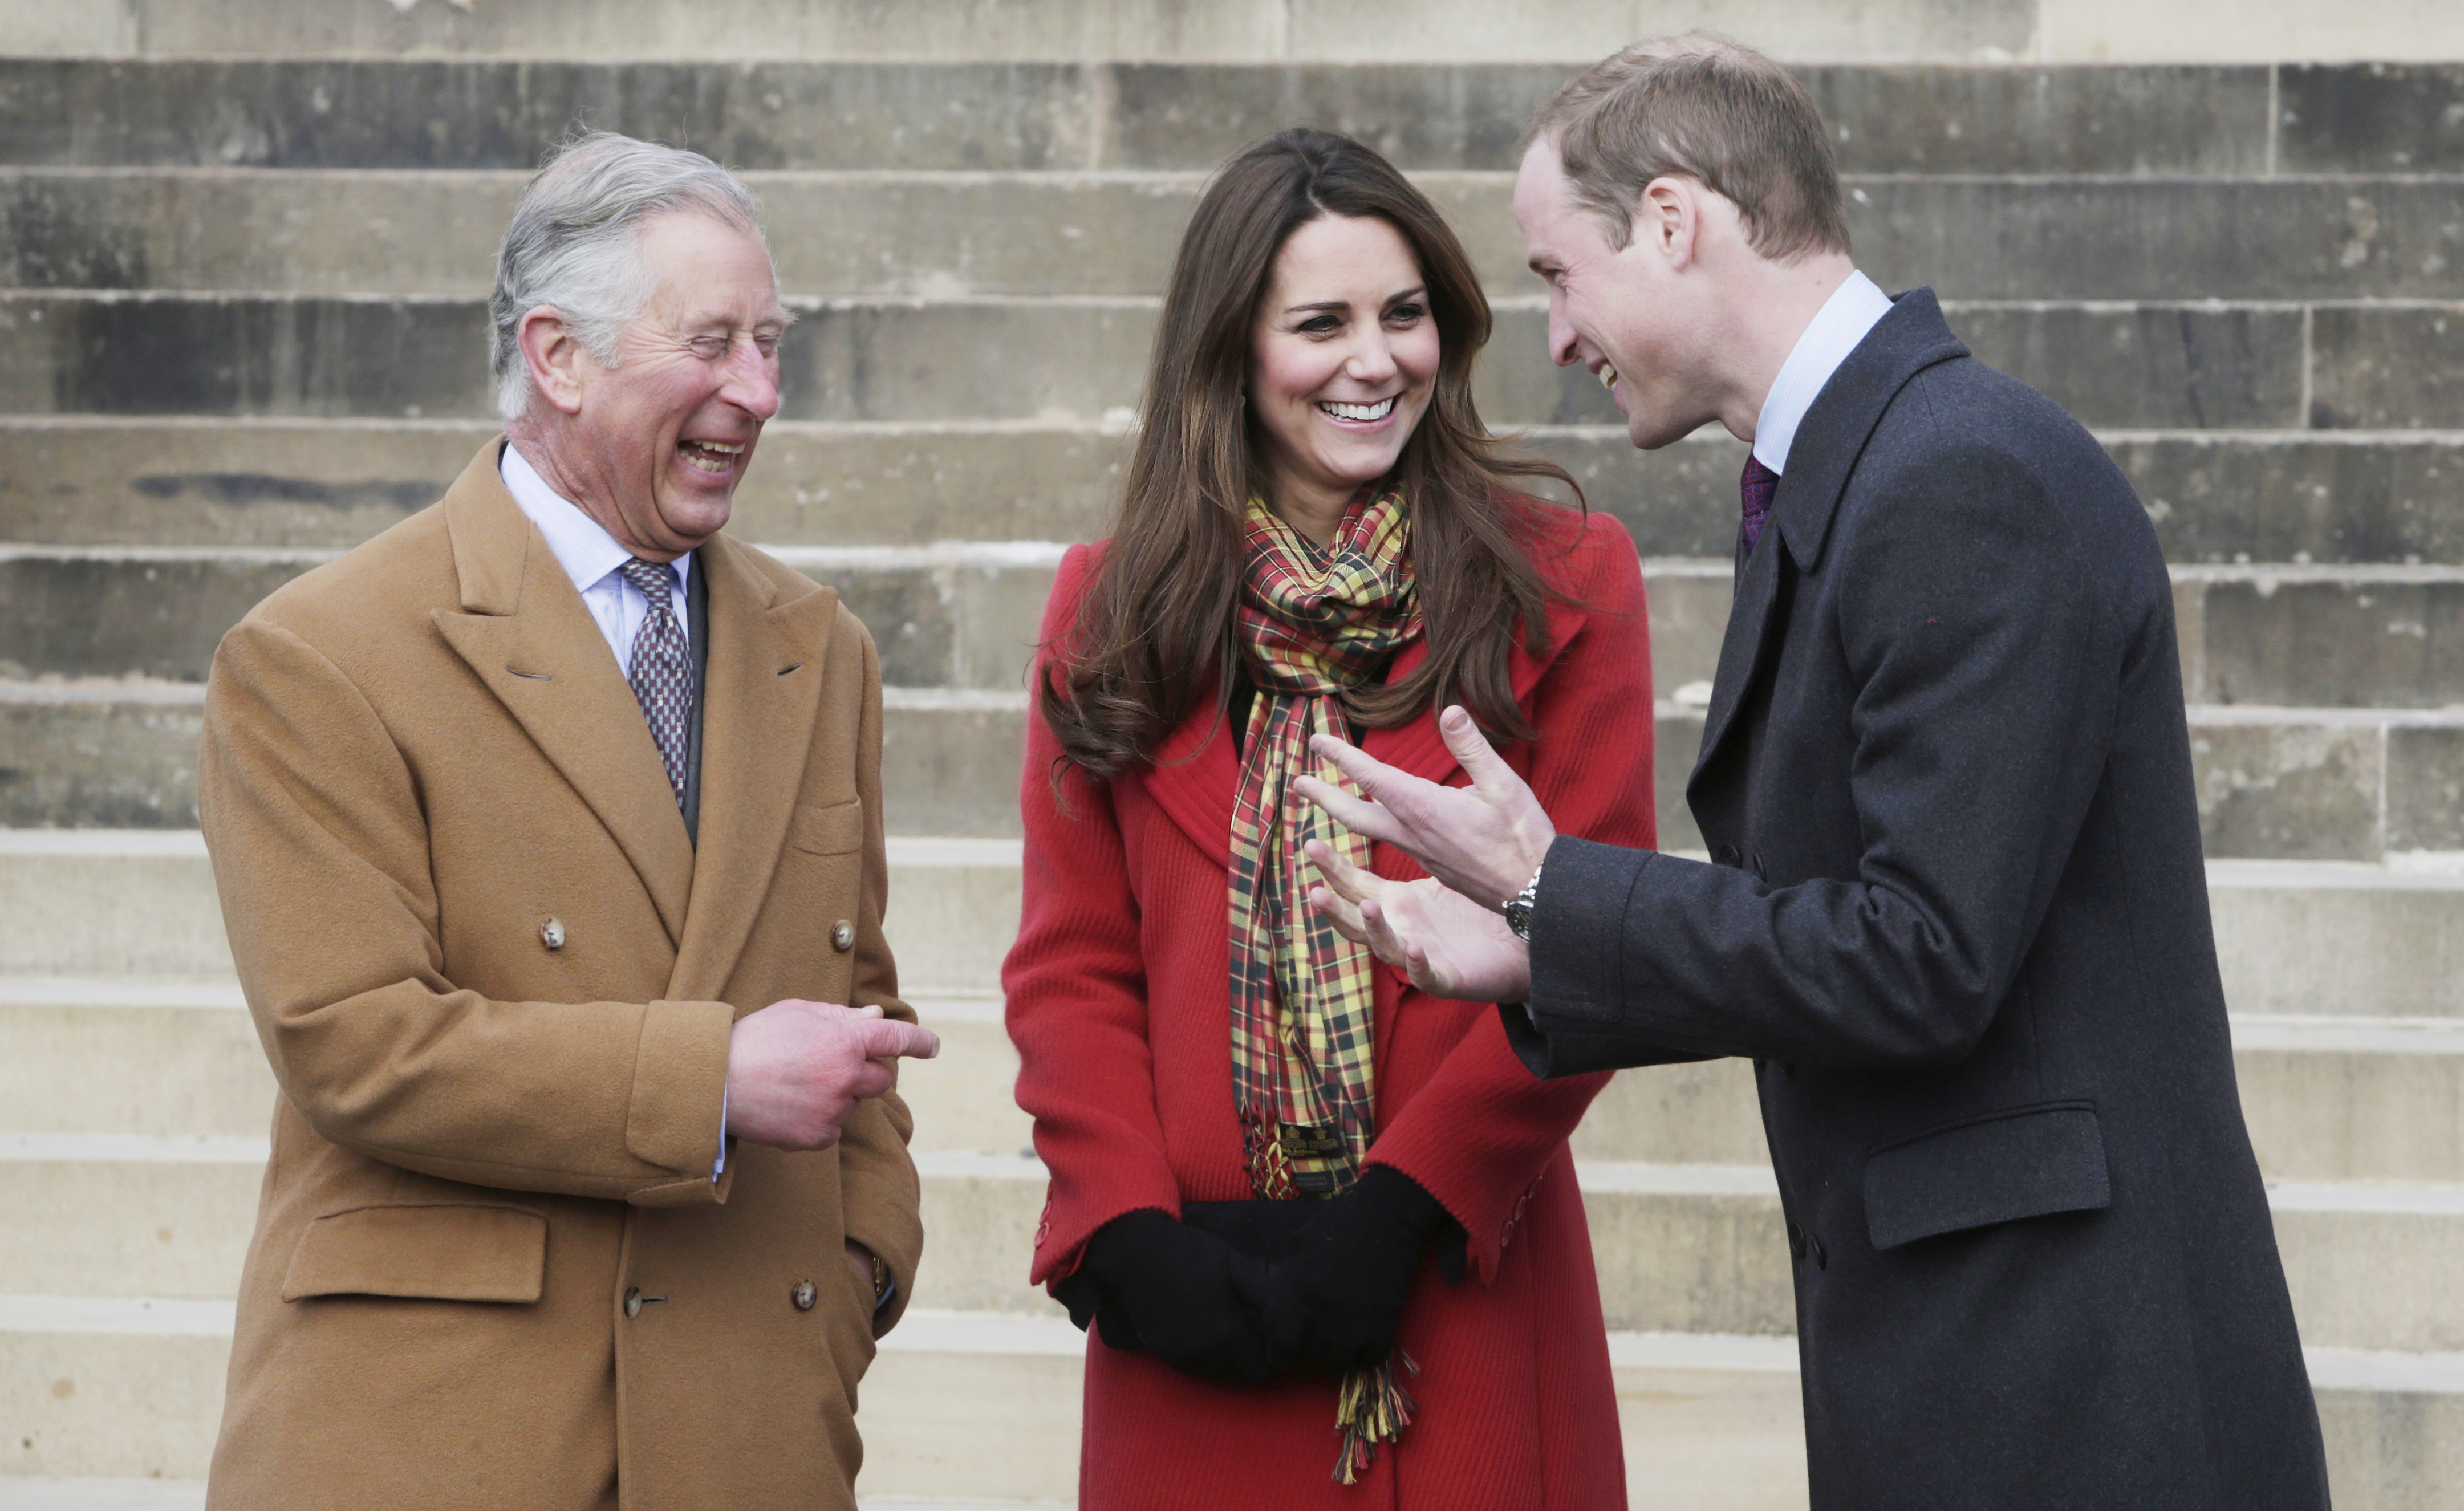 William will 'continue to balance supporting his wife and family' alongside his royal duties